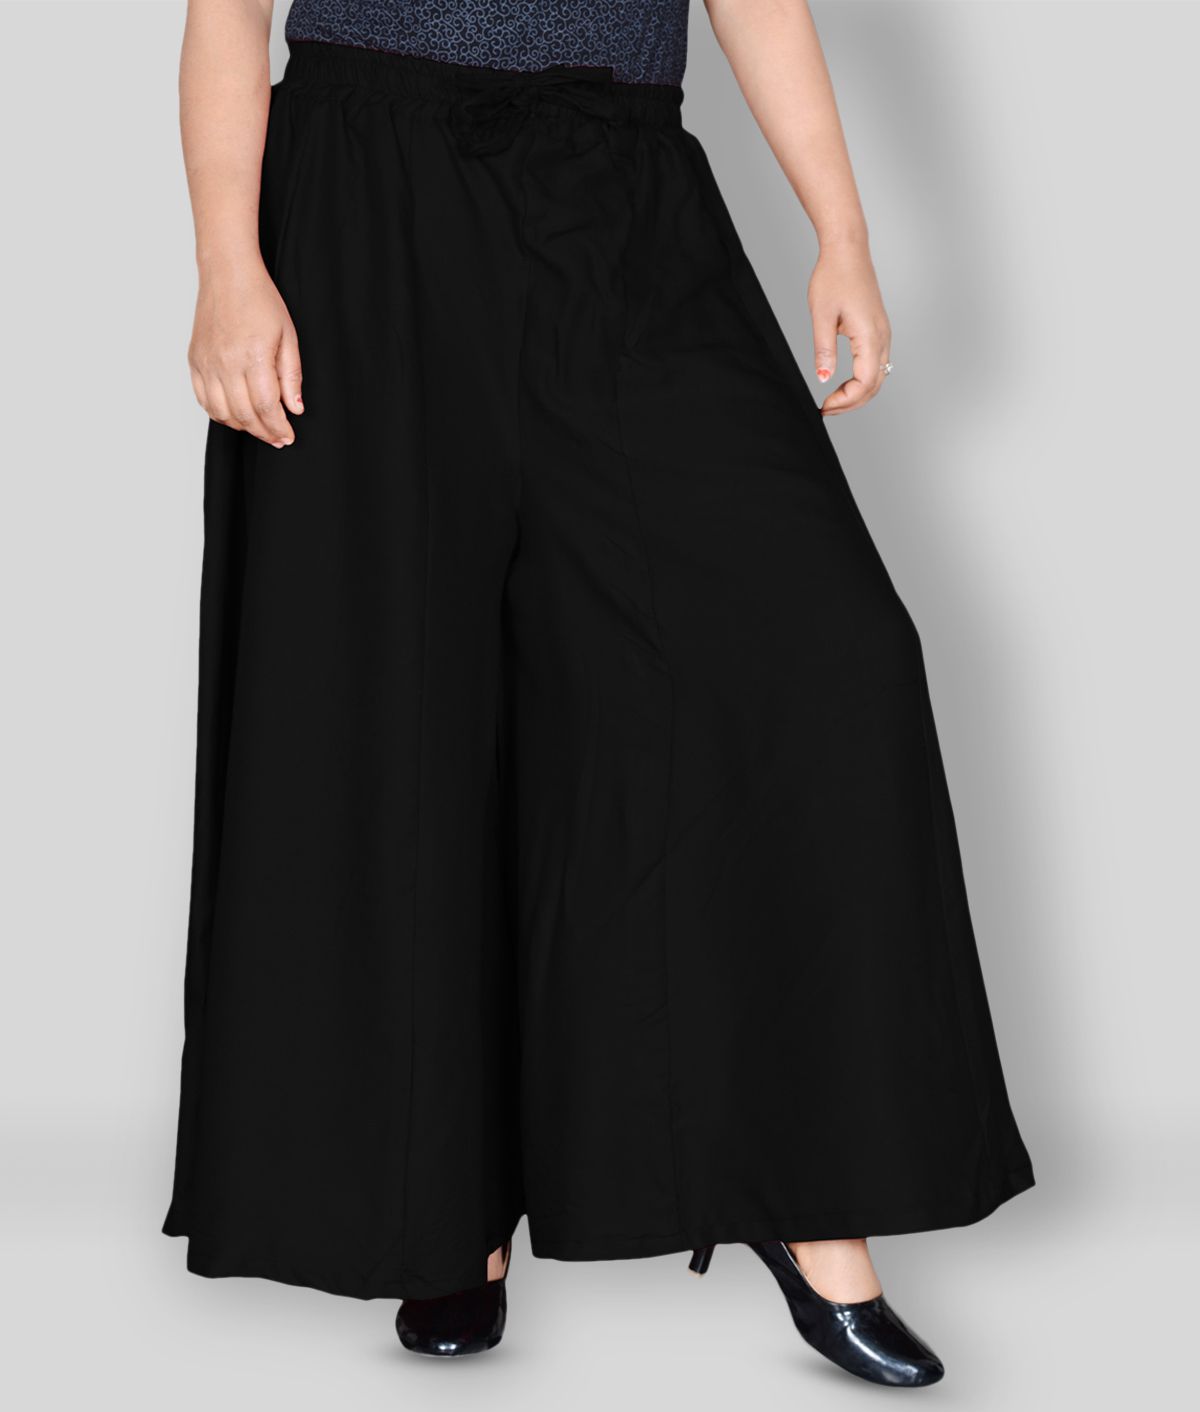     			Sttoffa - Black Rayon Flared Women's Palazzos ( Pack of 1 )